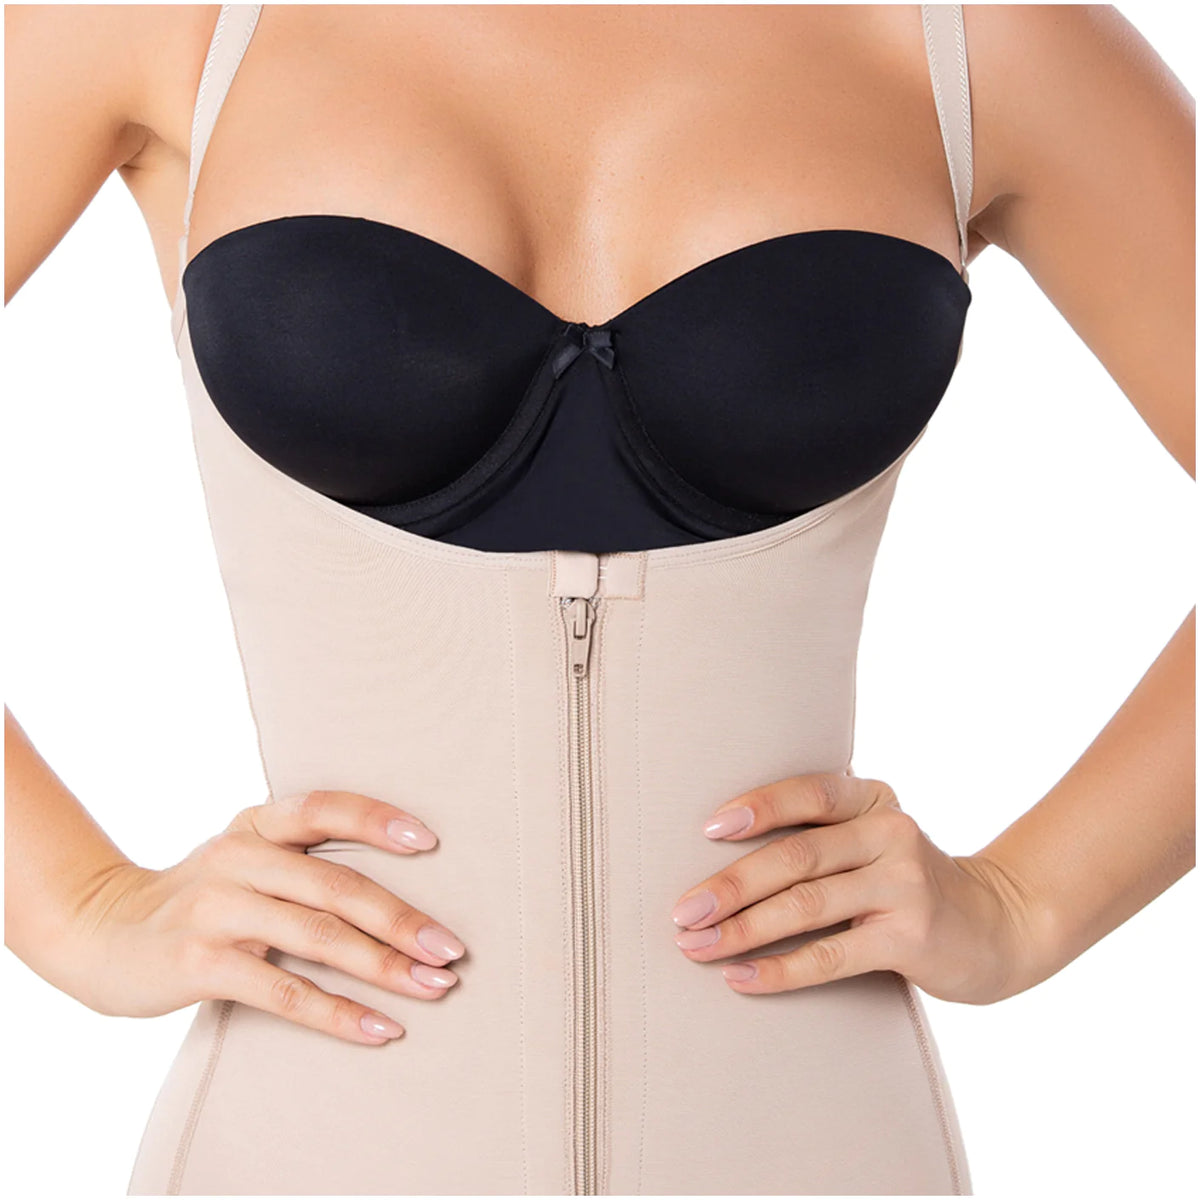 Tummy Tuck Post-Surgery and Daily Use Shapewear with Flat Zipper, Open  Bust, & Medium Compression Diane & Geordi 2396